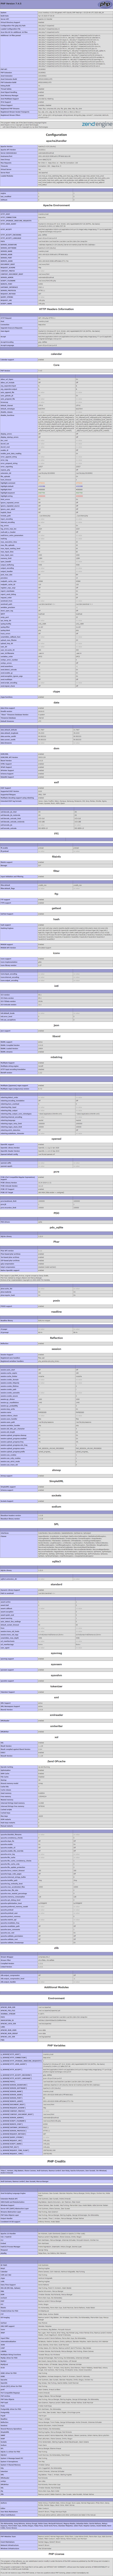 phpinfo()の結果